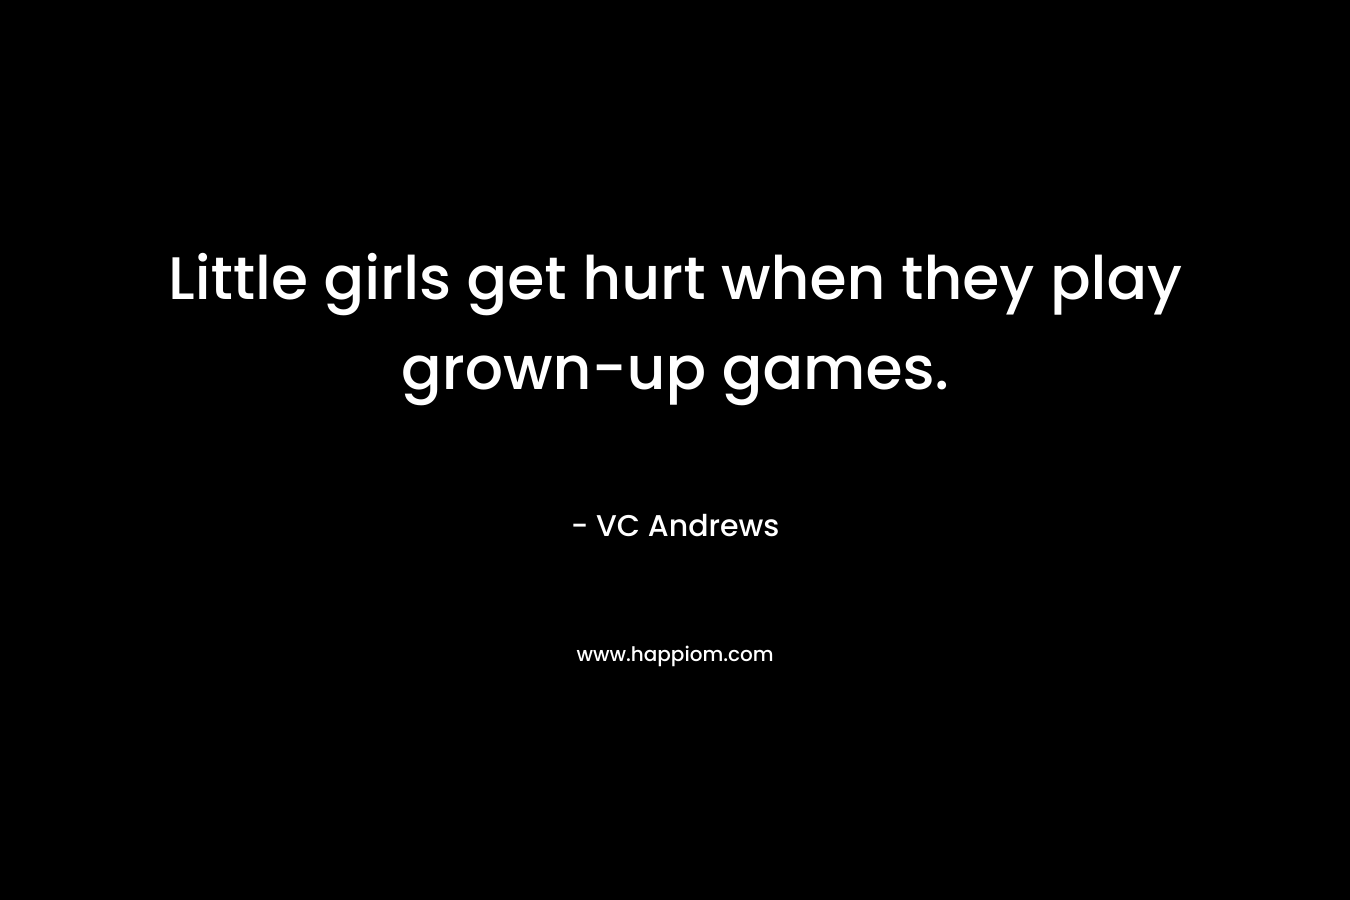 Little girls get hurt when they play grown-up games.